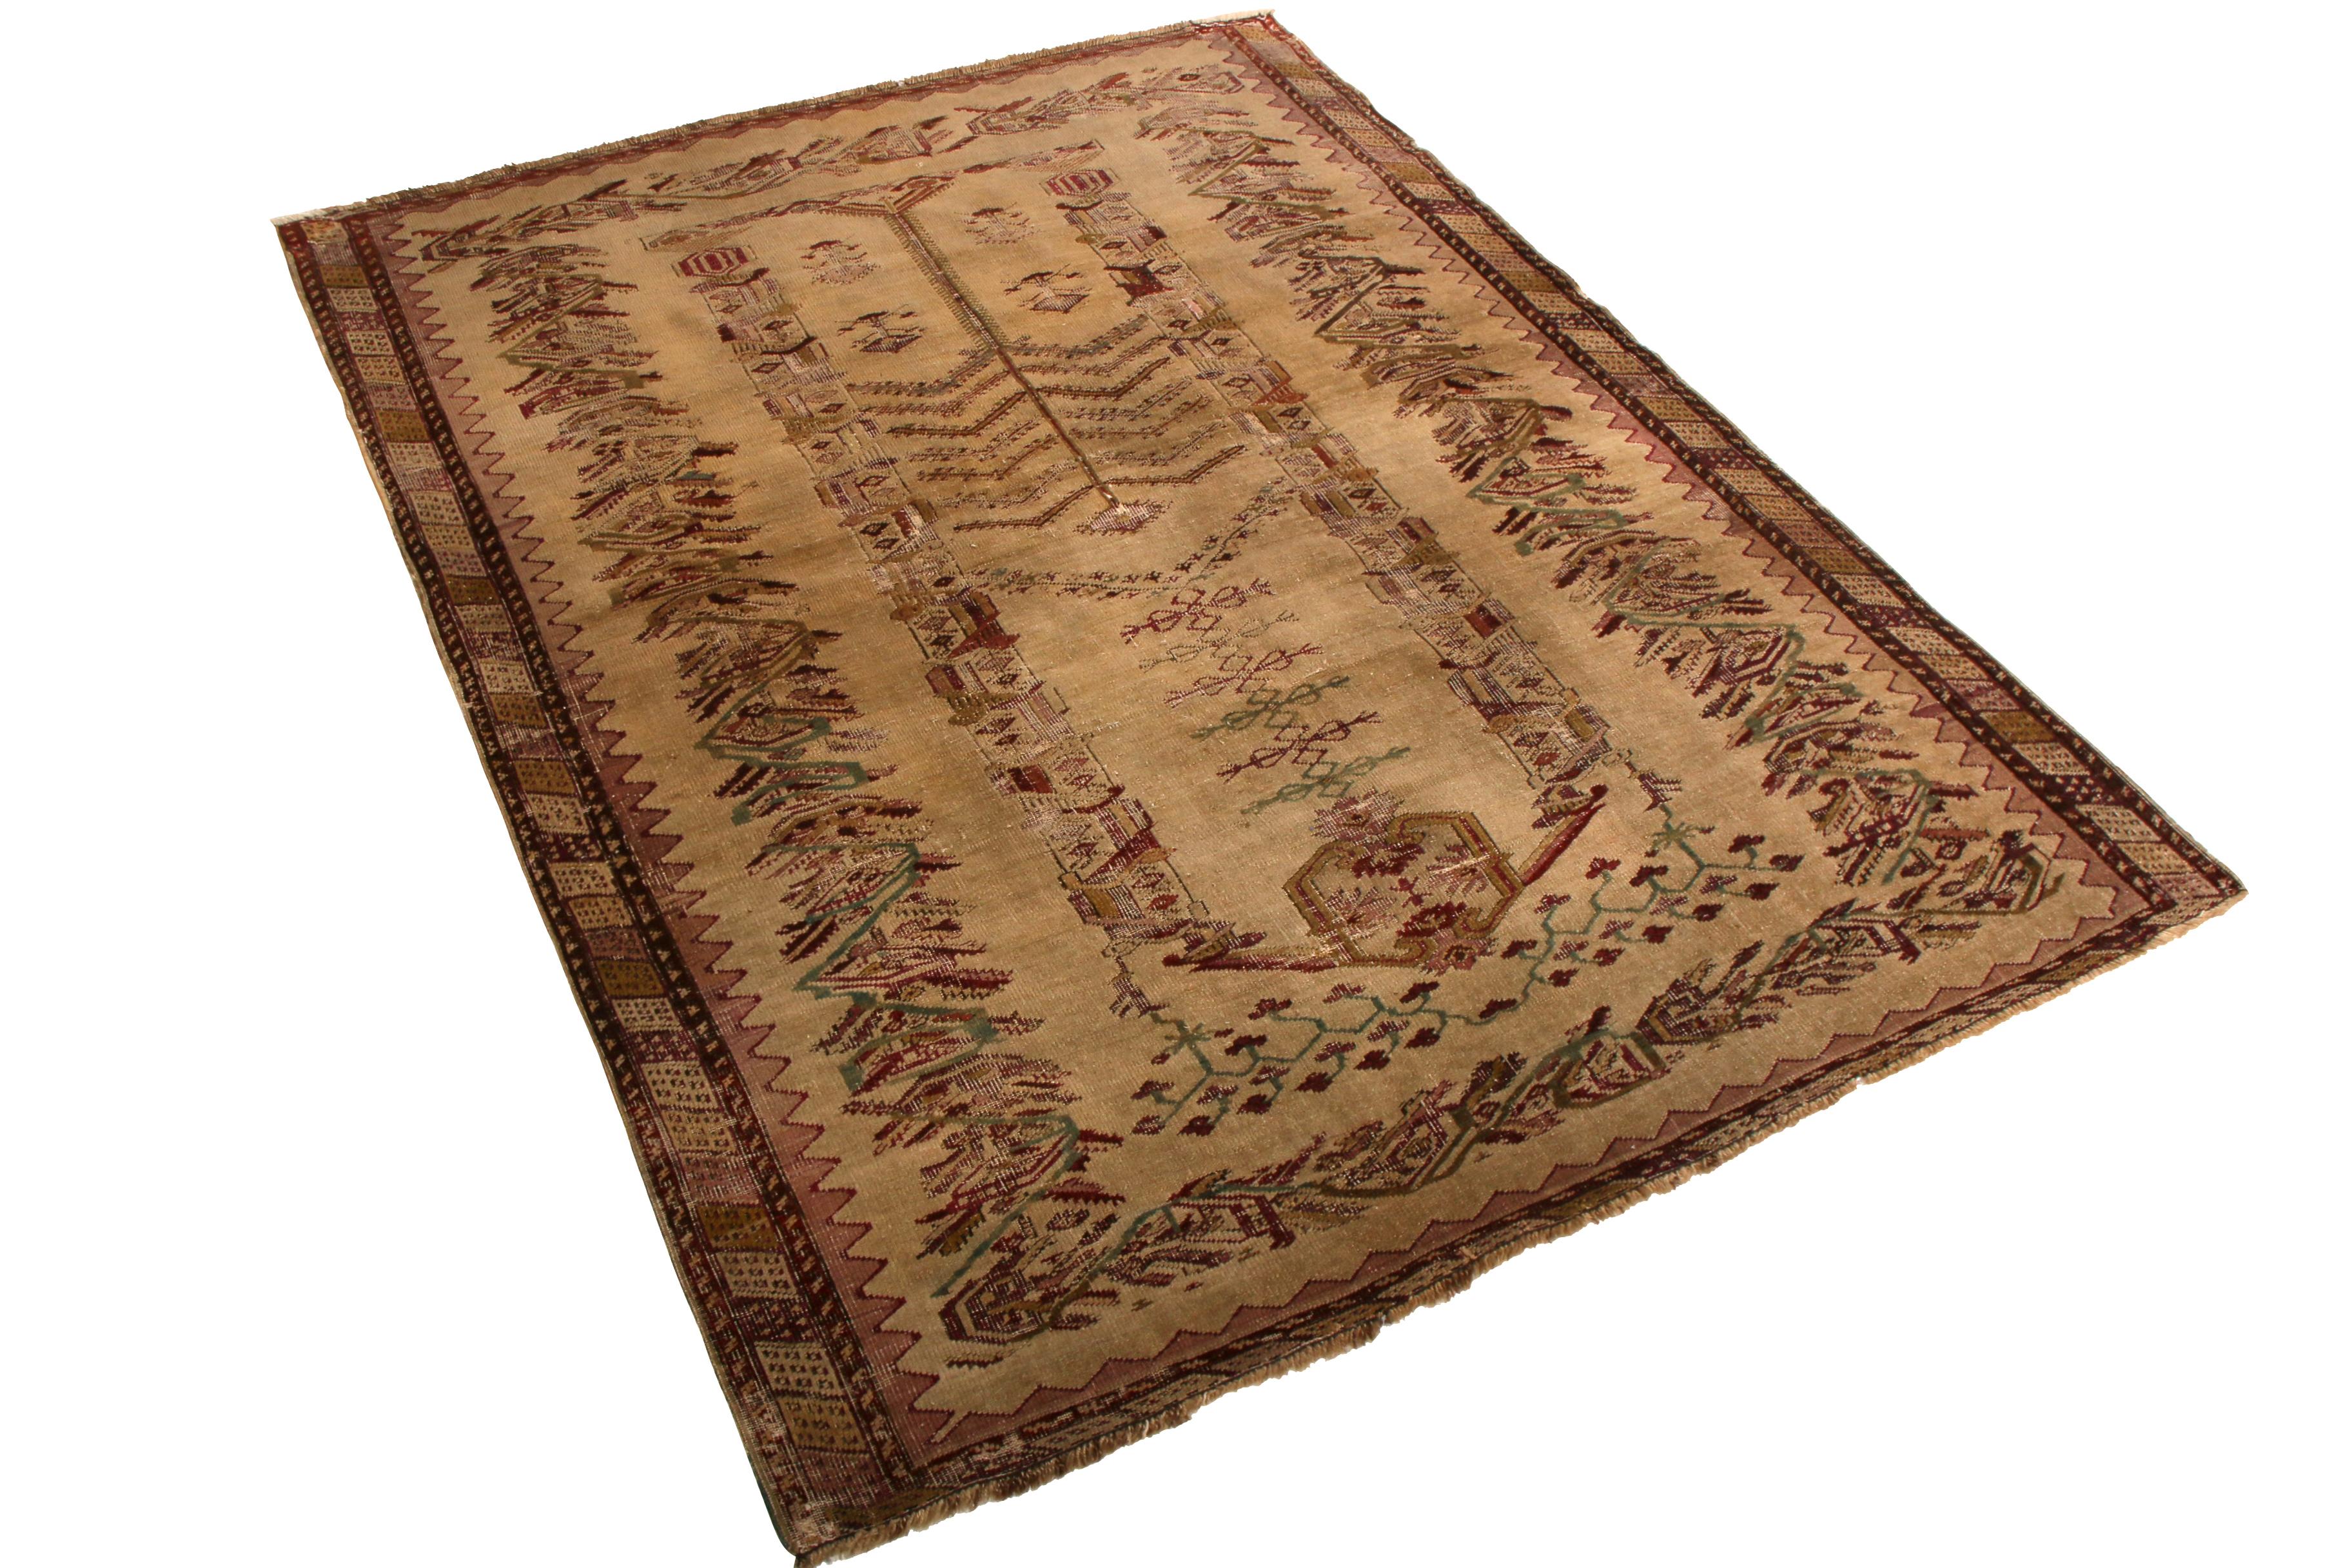 Hand knotted in wool between 1910-1920 from the titular Anatolian region of Turkey, this antique Ghiordes rug enjoys allusions to the Mihrab and tree of life symbols, venerated in part for the unique variations between individualistic rugs of this